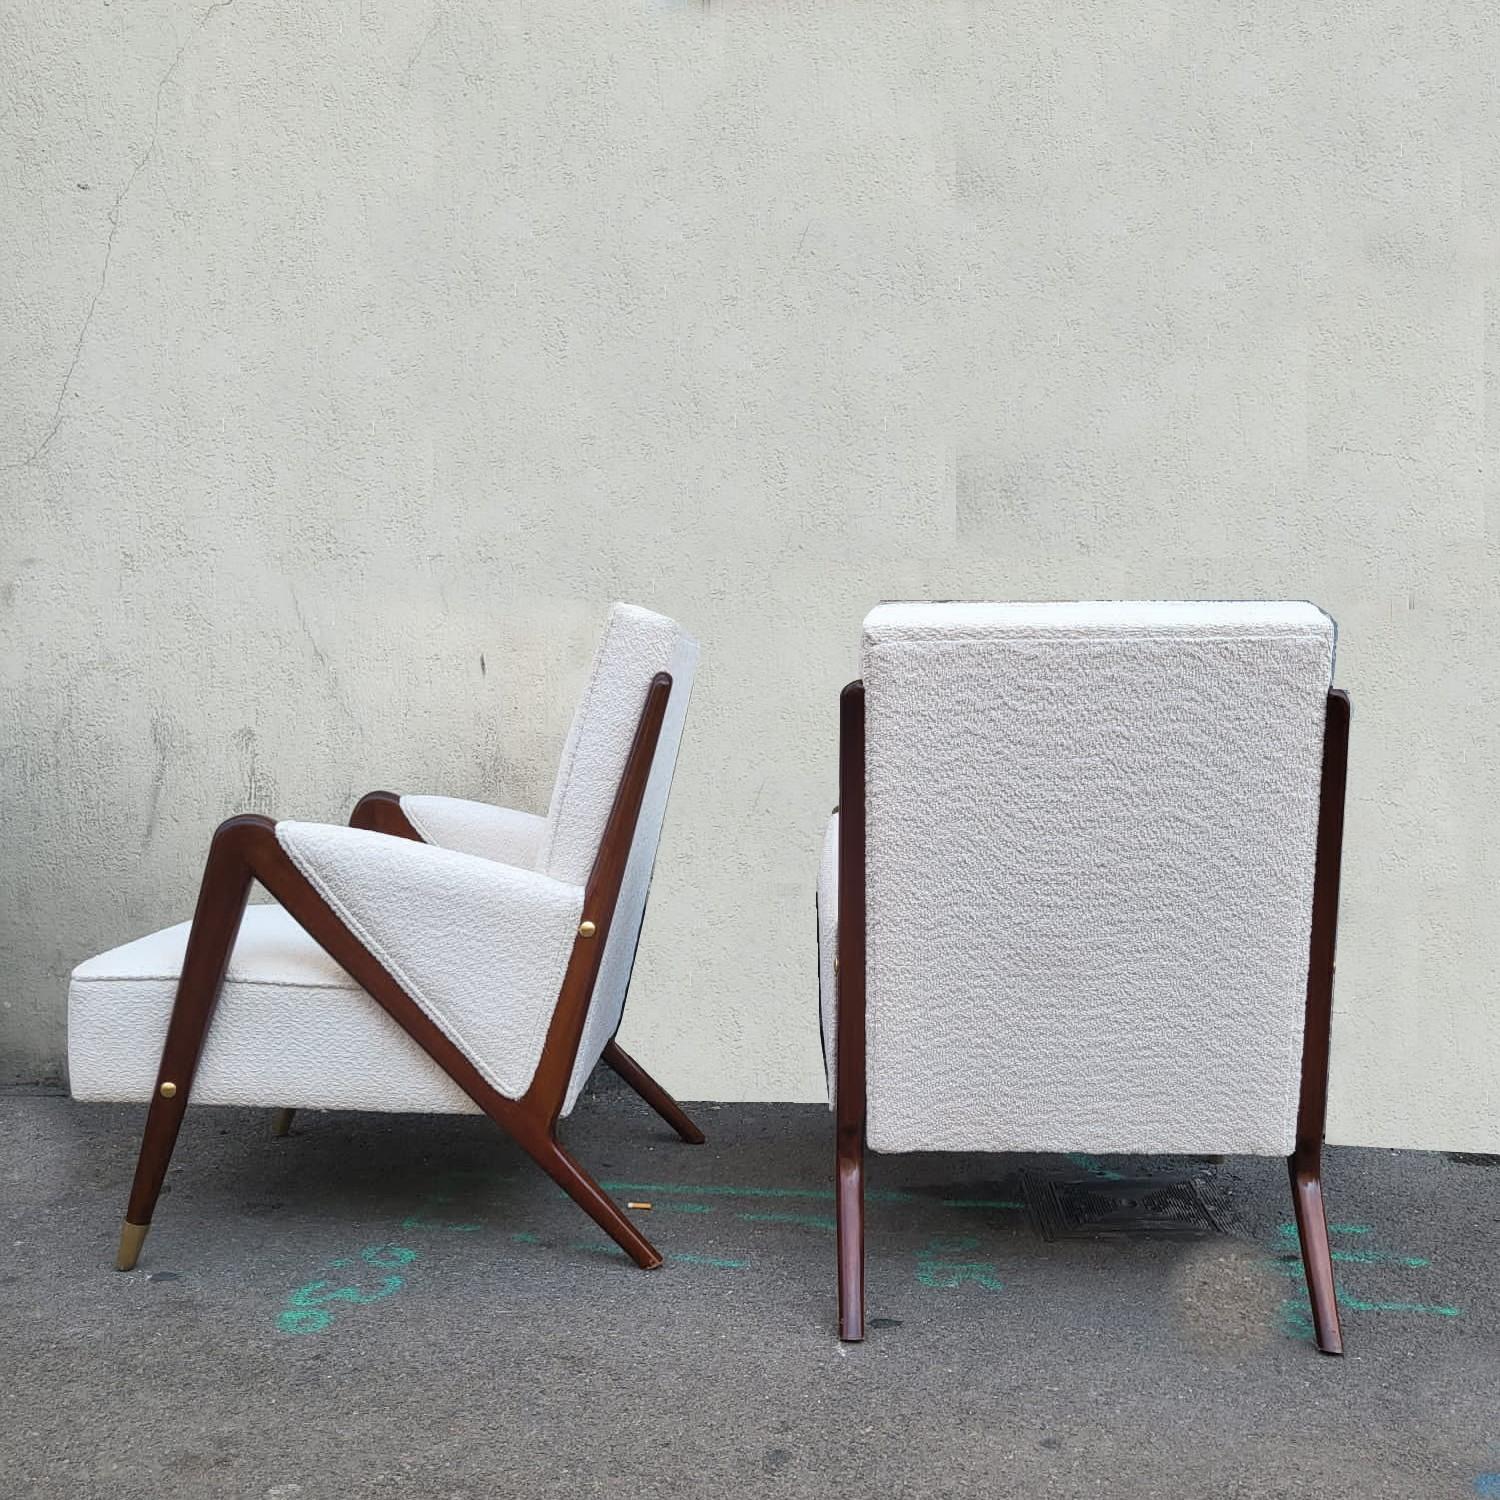 Pair Of Armchairs, Design From The 1950s/1960s 3